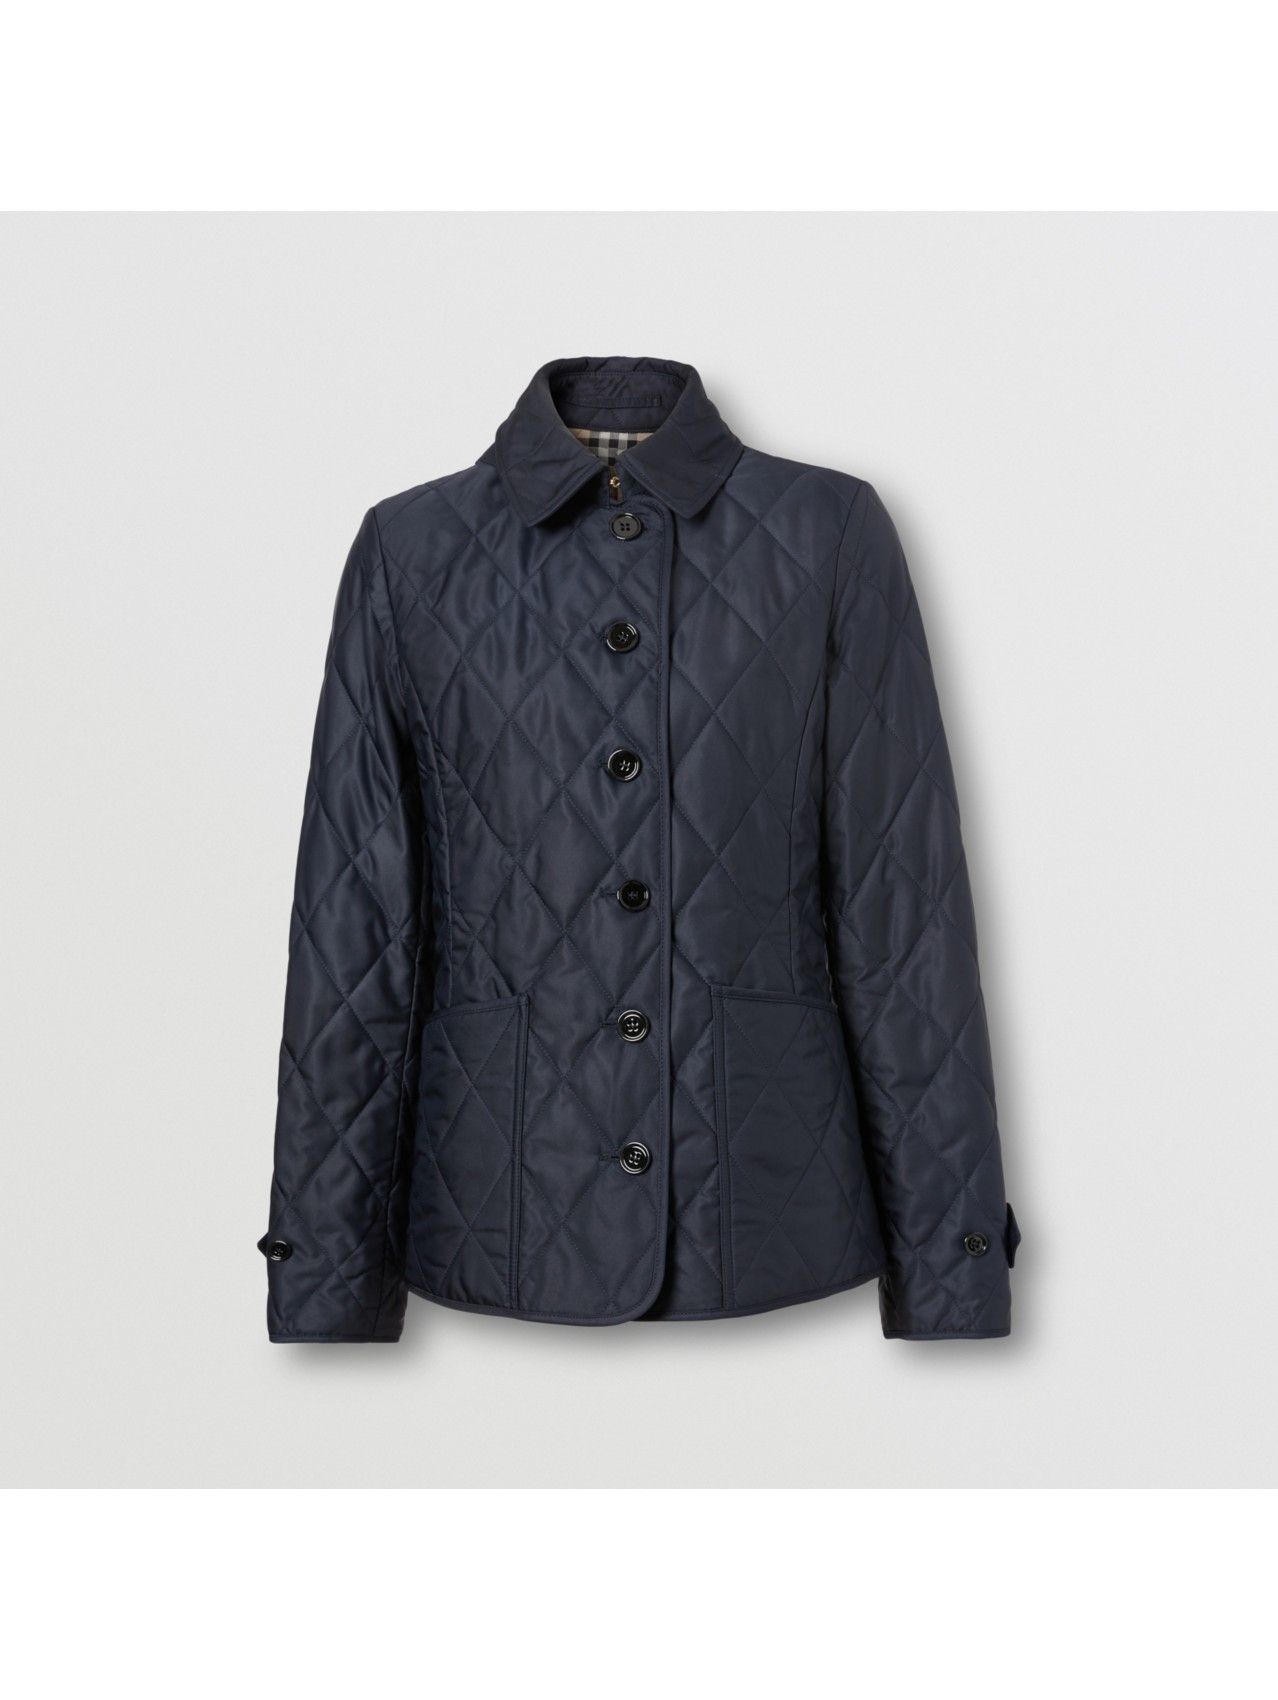 Women's Jackets | Leather & Bomber Jackets | Burberry® Official